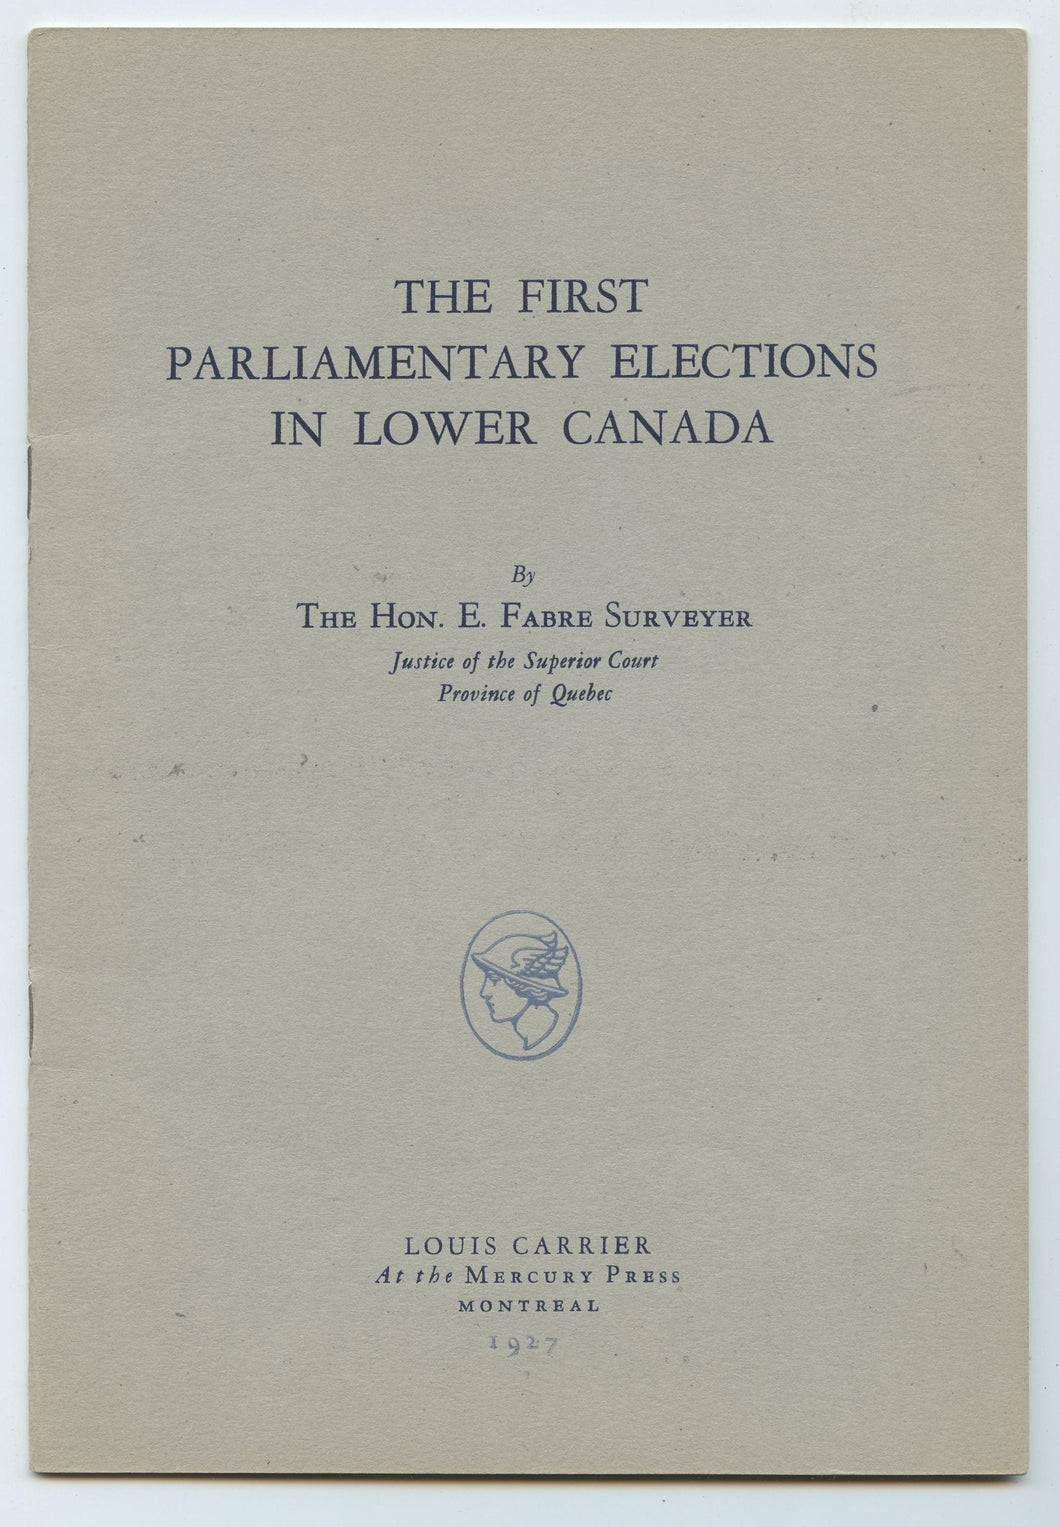 The First Parliamentary Elections in Lower Canada